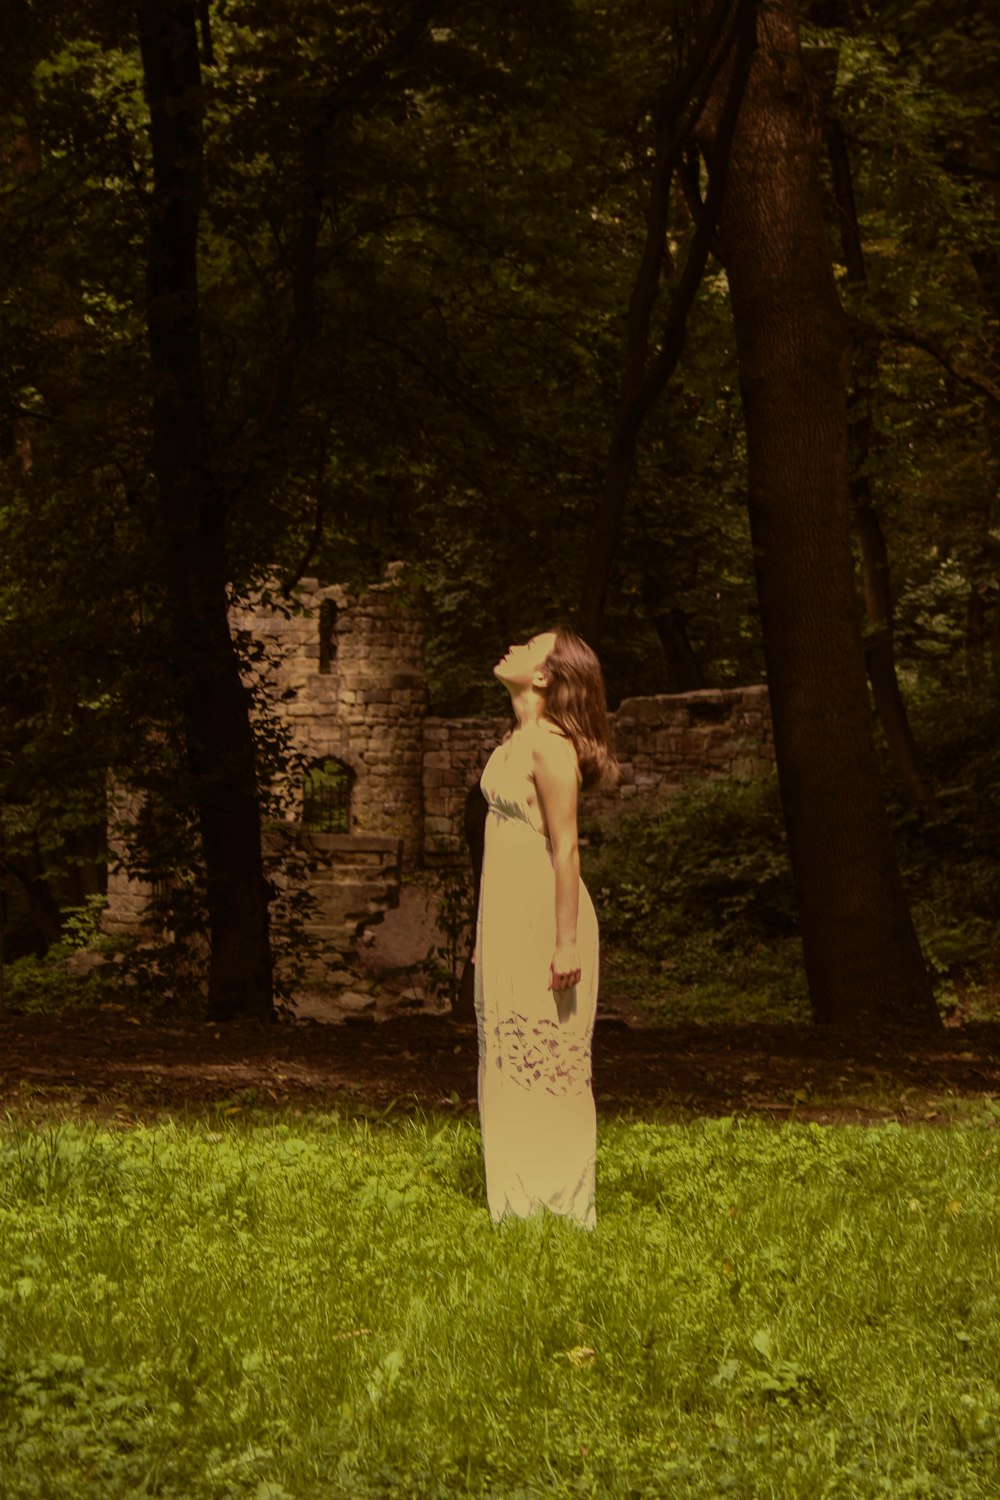 a person in a dress standing in a grassy area with trees and a brick building in the background